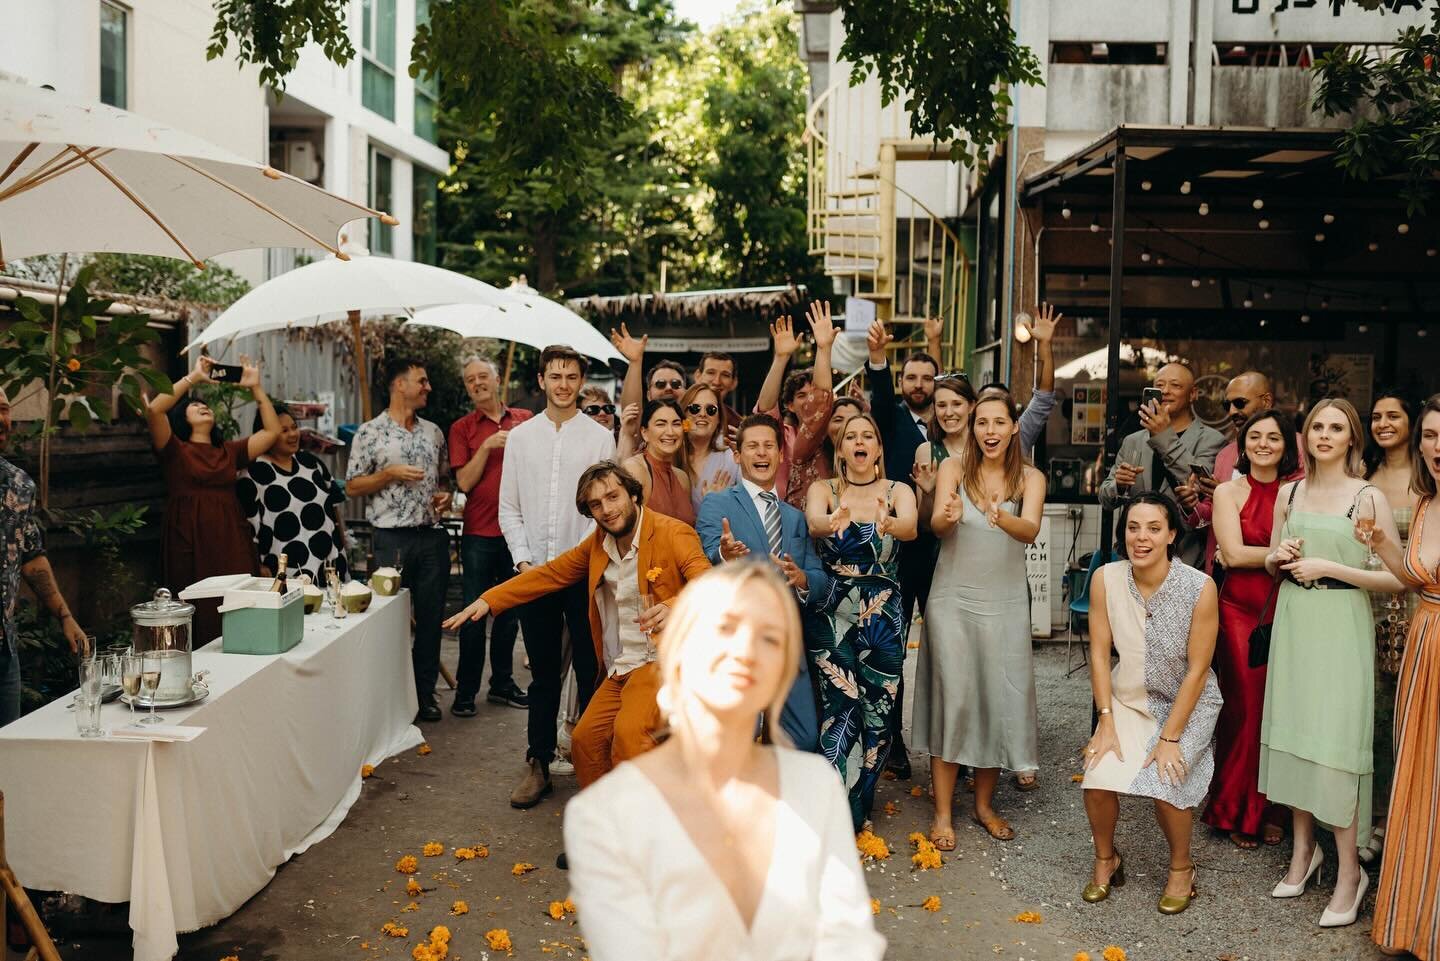 I actually don&rsquo;t see a lot of bouquet tosses at the weddings I shoot which is fine, but they do make for some of the most wildly fun photos 💐

These are from the wedding I got to shoot in Bangkok last winter! I&rsquo;m going through them to bl